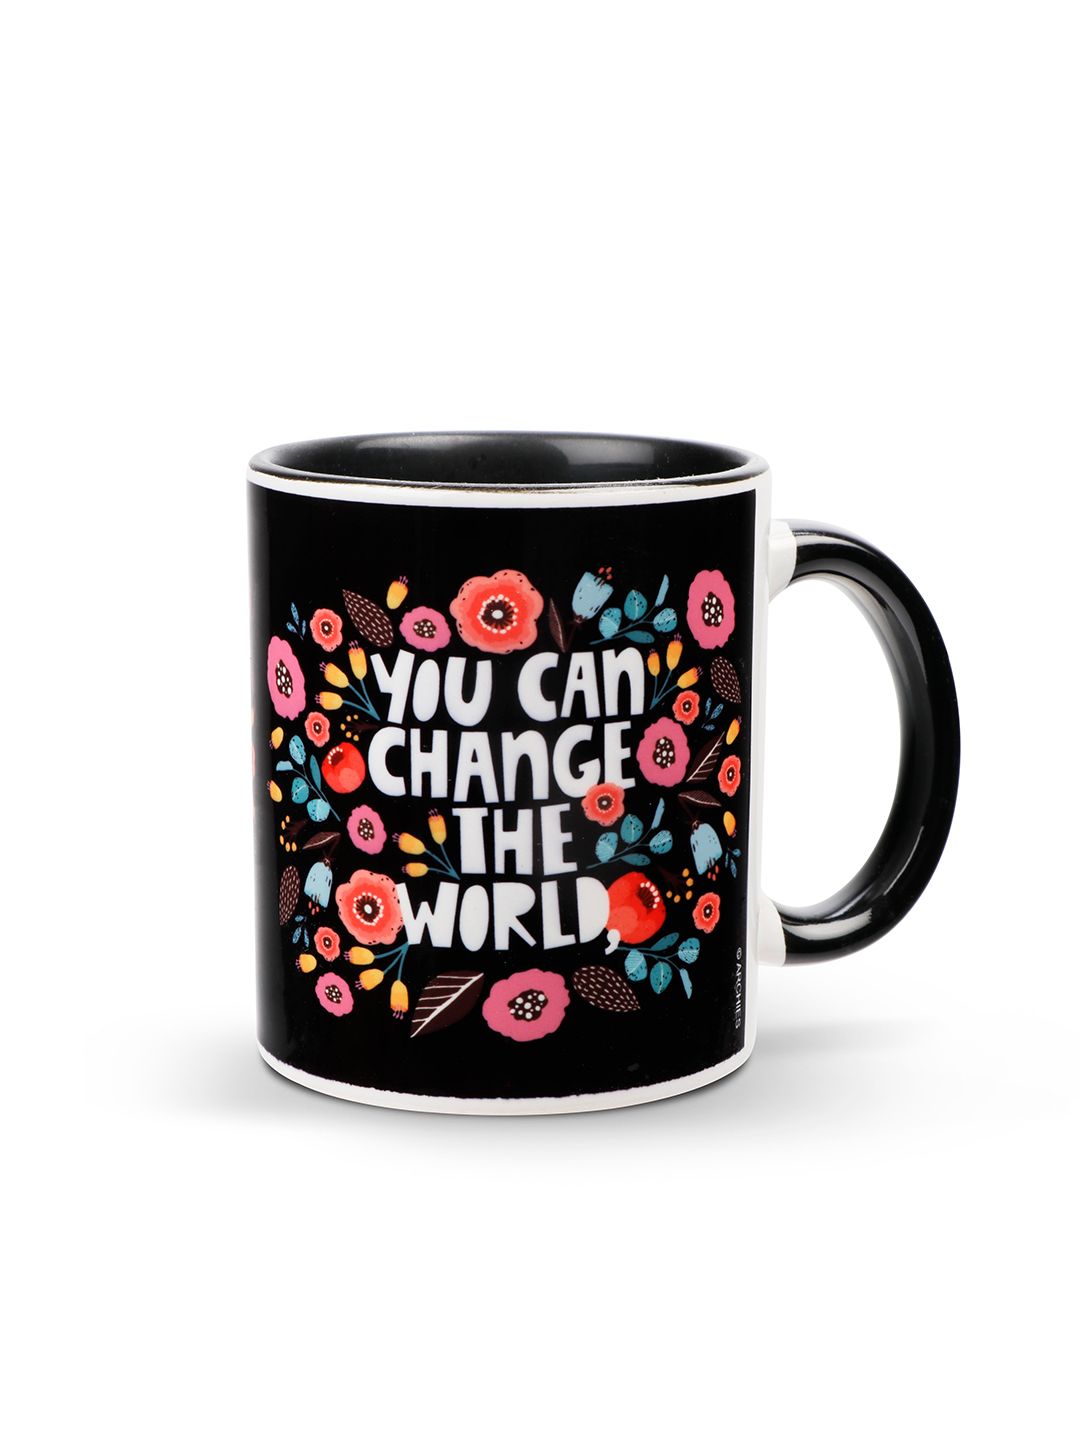 Archies Black & White Printed Ceramic Glossy Mugs Set of Cups and Mugs Price in India